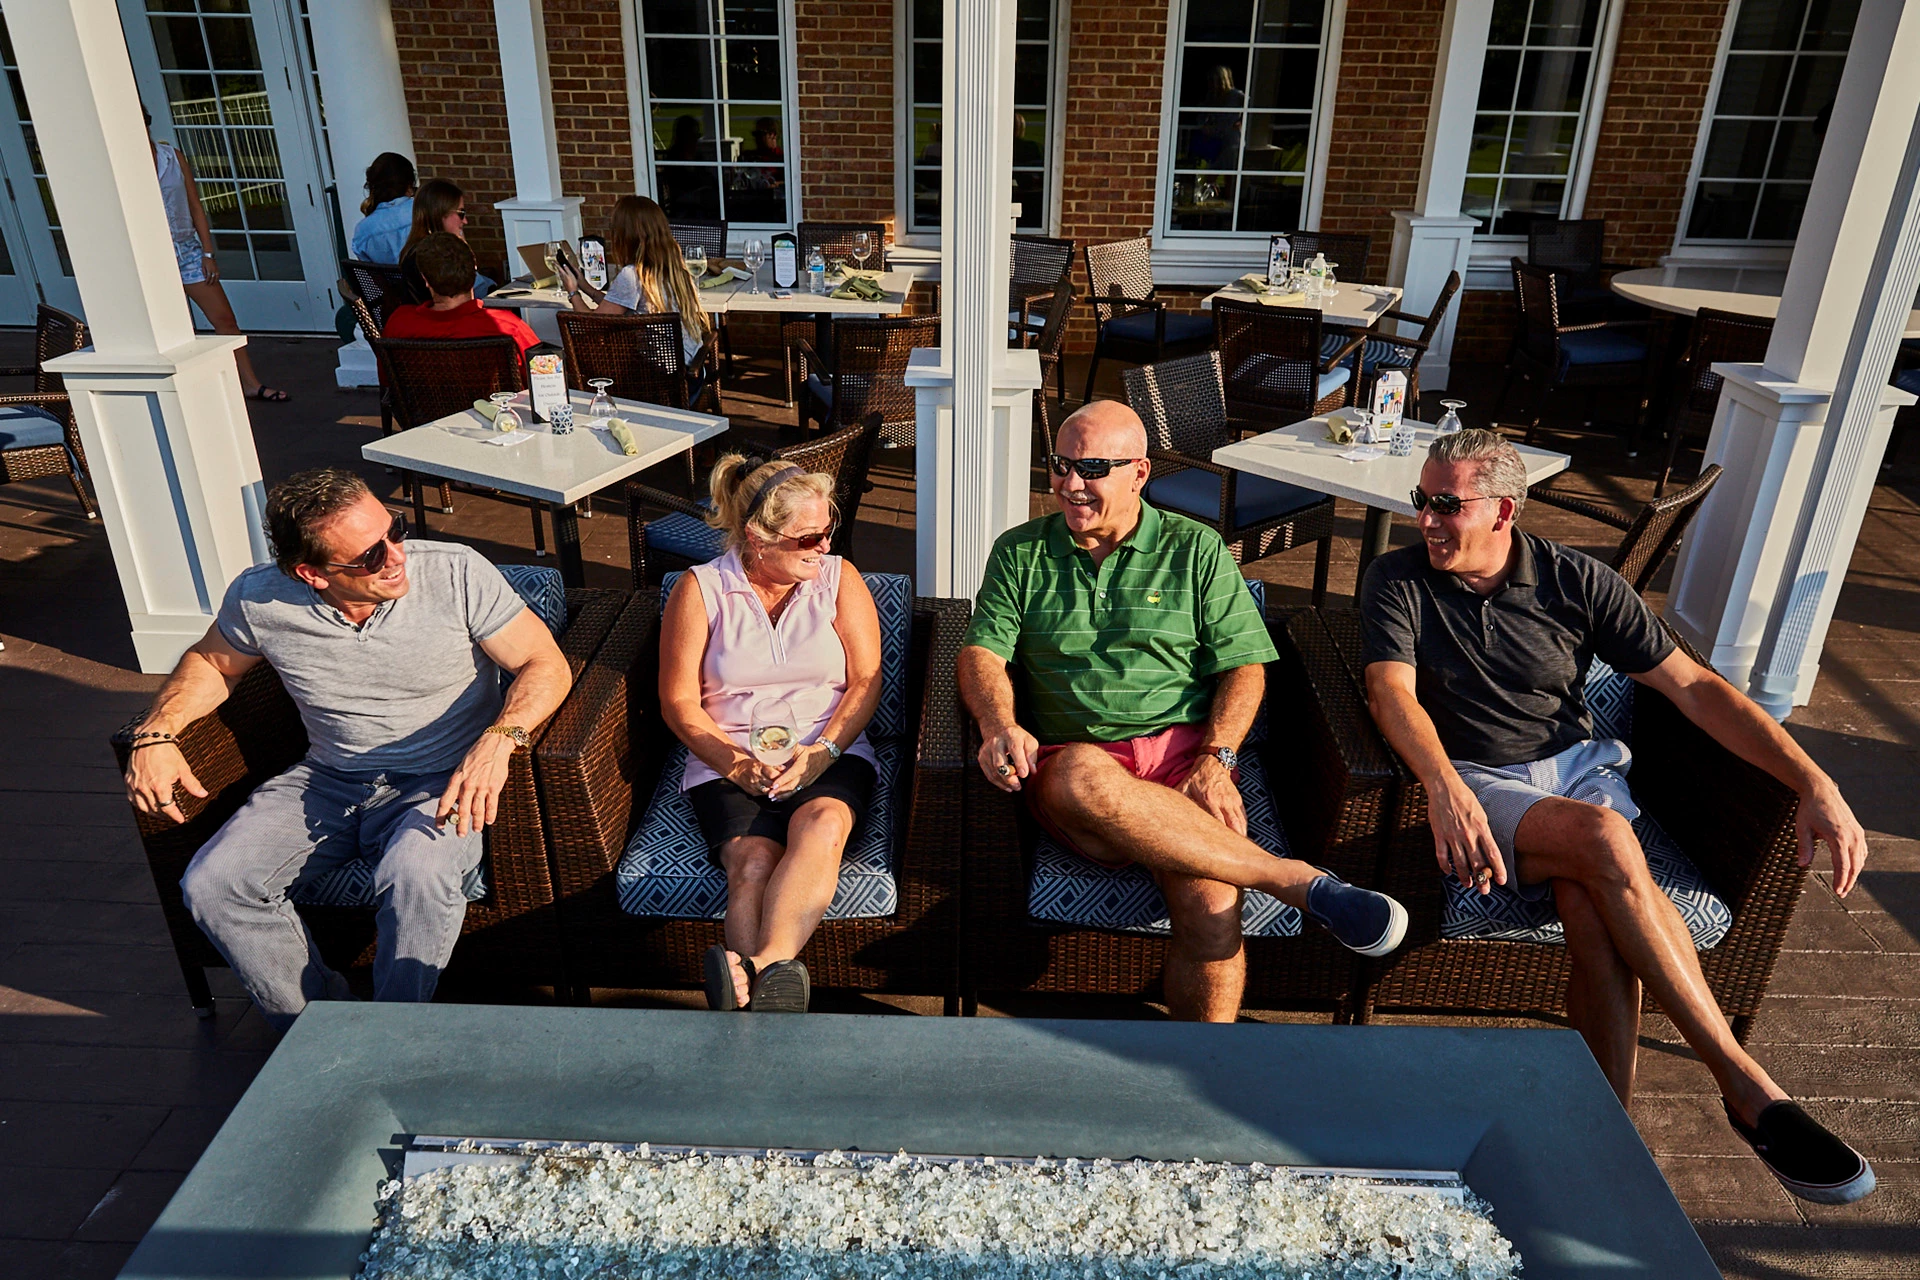 Hamlet Golf & Country Club - Members on the patio